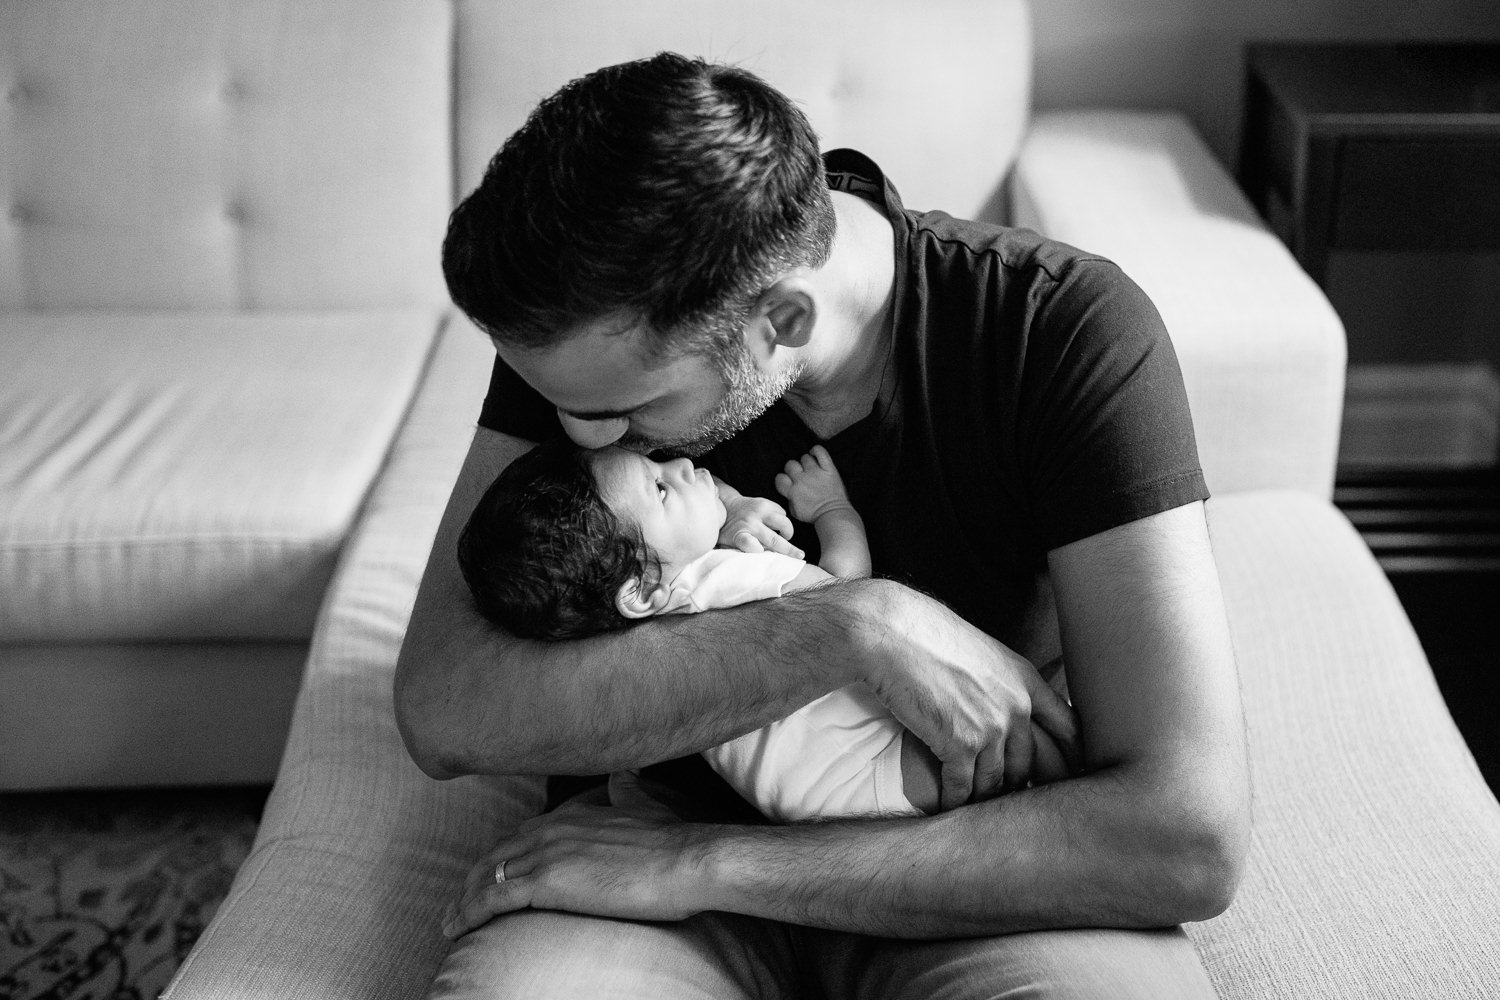 new father sitting on edge of couch holding 1 month old baby boy in onesie in his arms and kissing son on forhead - York Region Lifestyle Photography